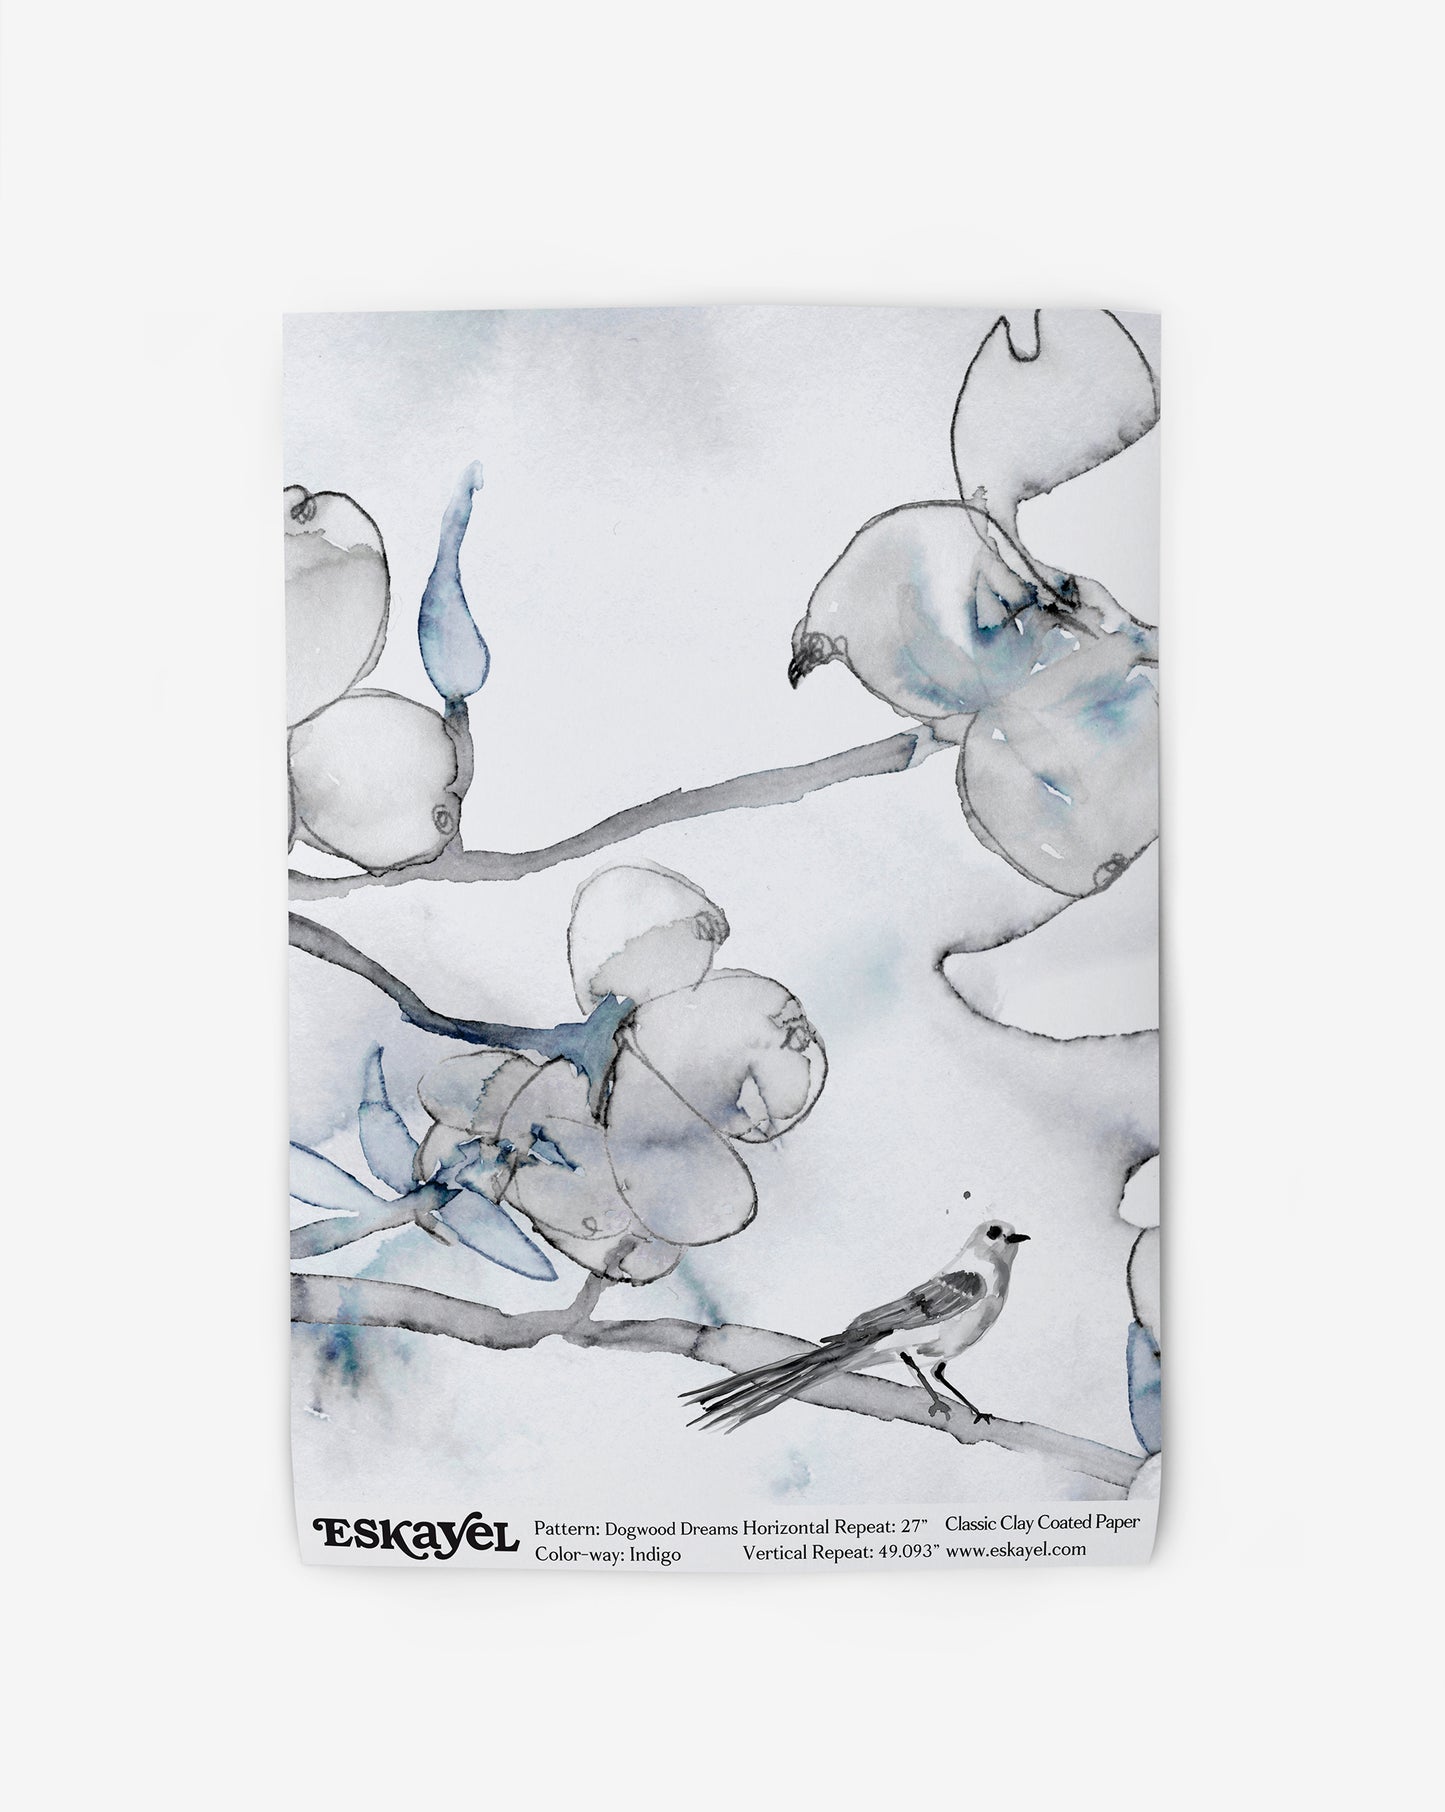 A blue and white Dogwood Dreams Wallpaper|Indigo colorway towel with birds on a branch.